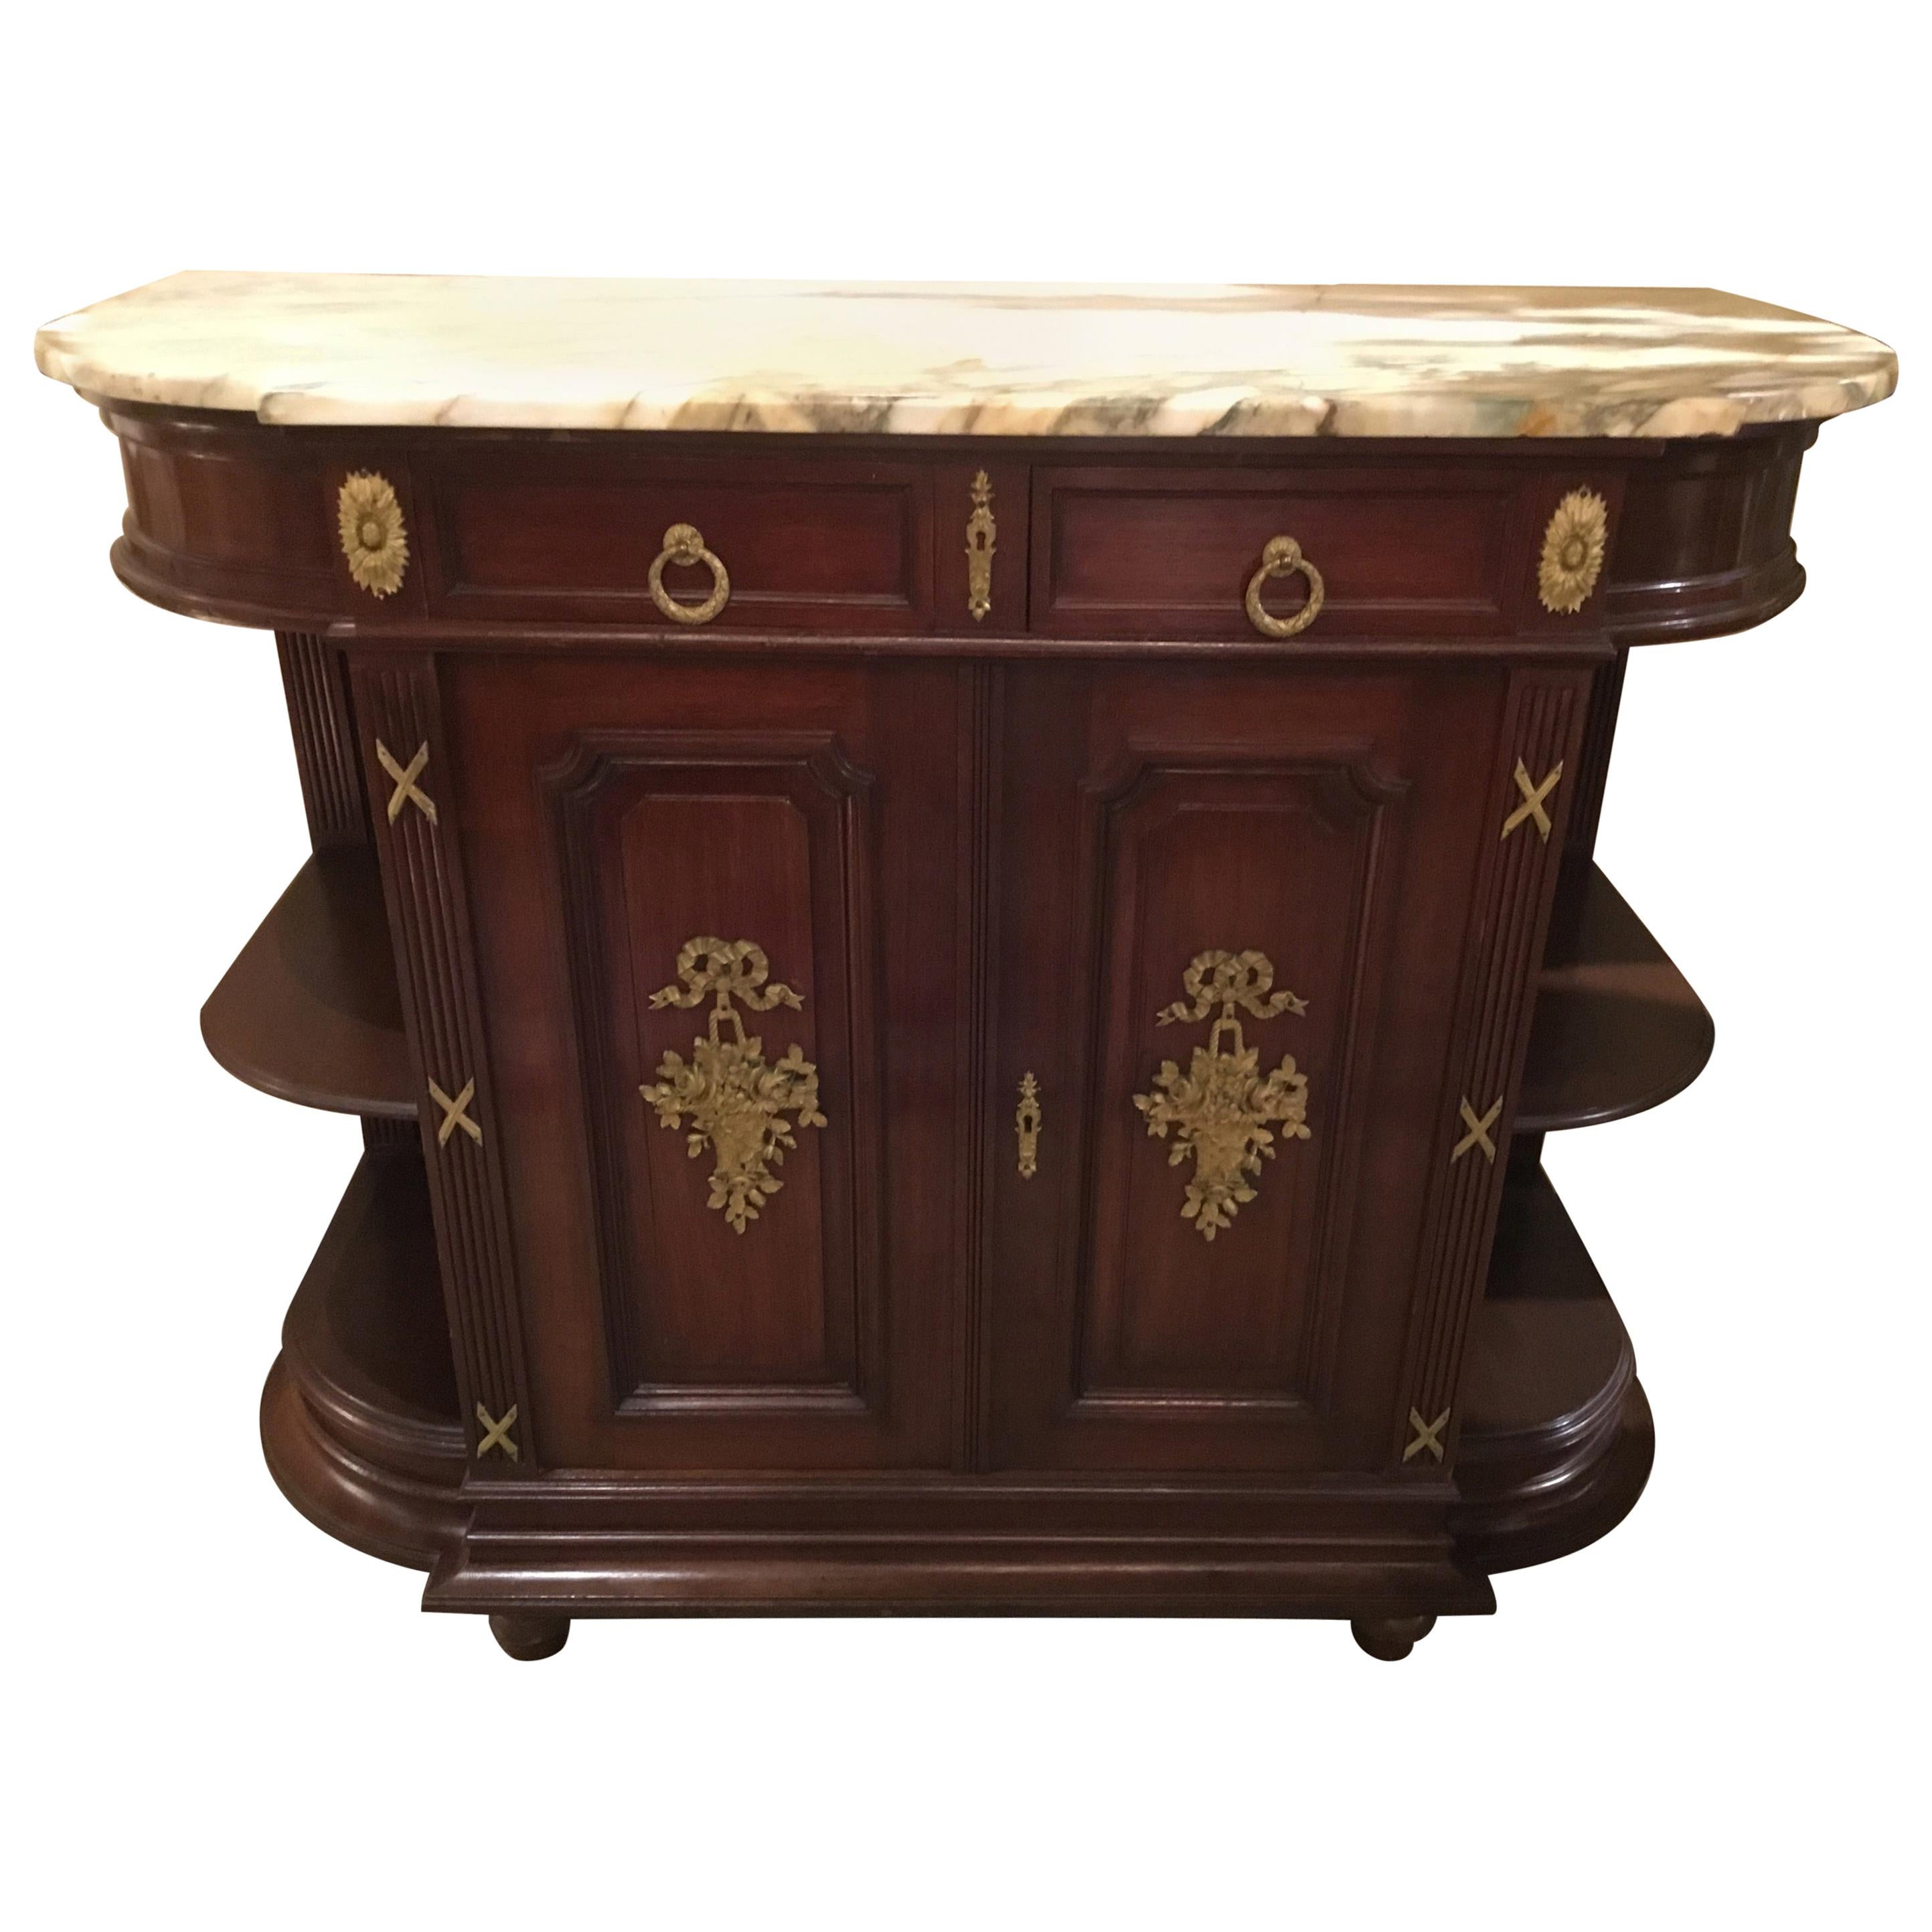 Walnut buffet in walnut with gilt bronze mounts depicting a basket with
Floral and foliate designs and topped by a bow. A cream marble top 
With shades of gray and is over two drawers. Two doors open to
Storage with one shelf. The cabinet is in a